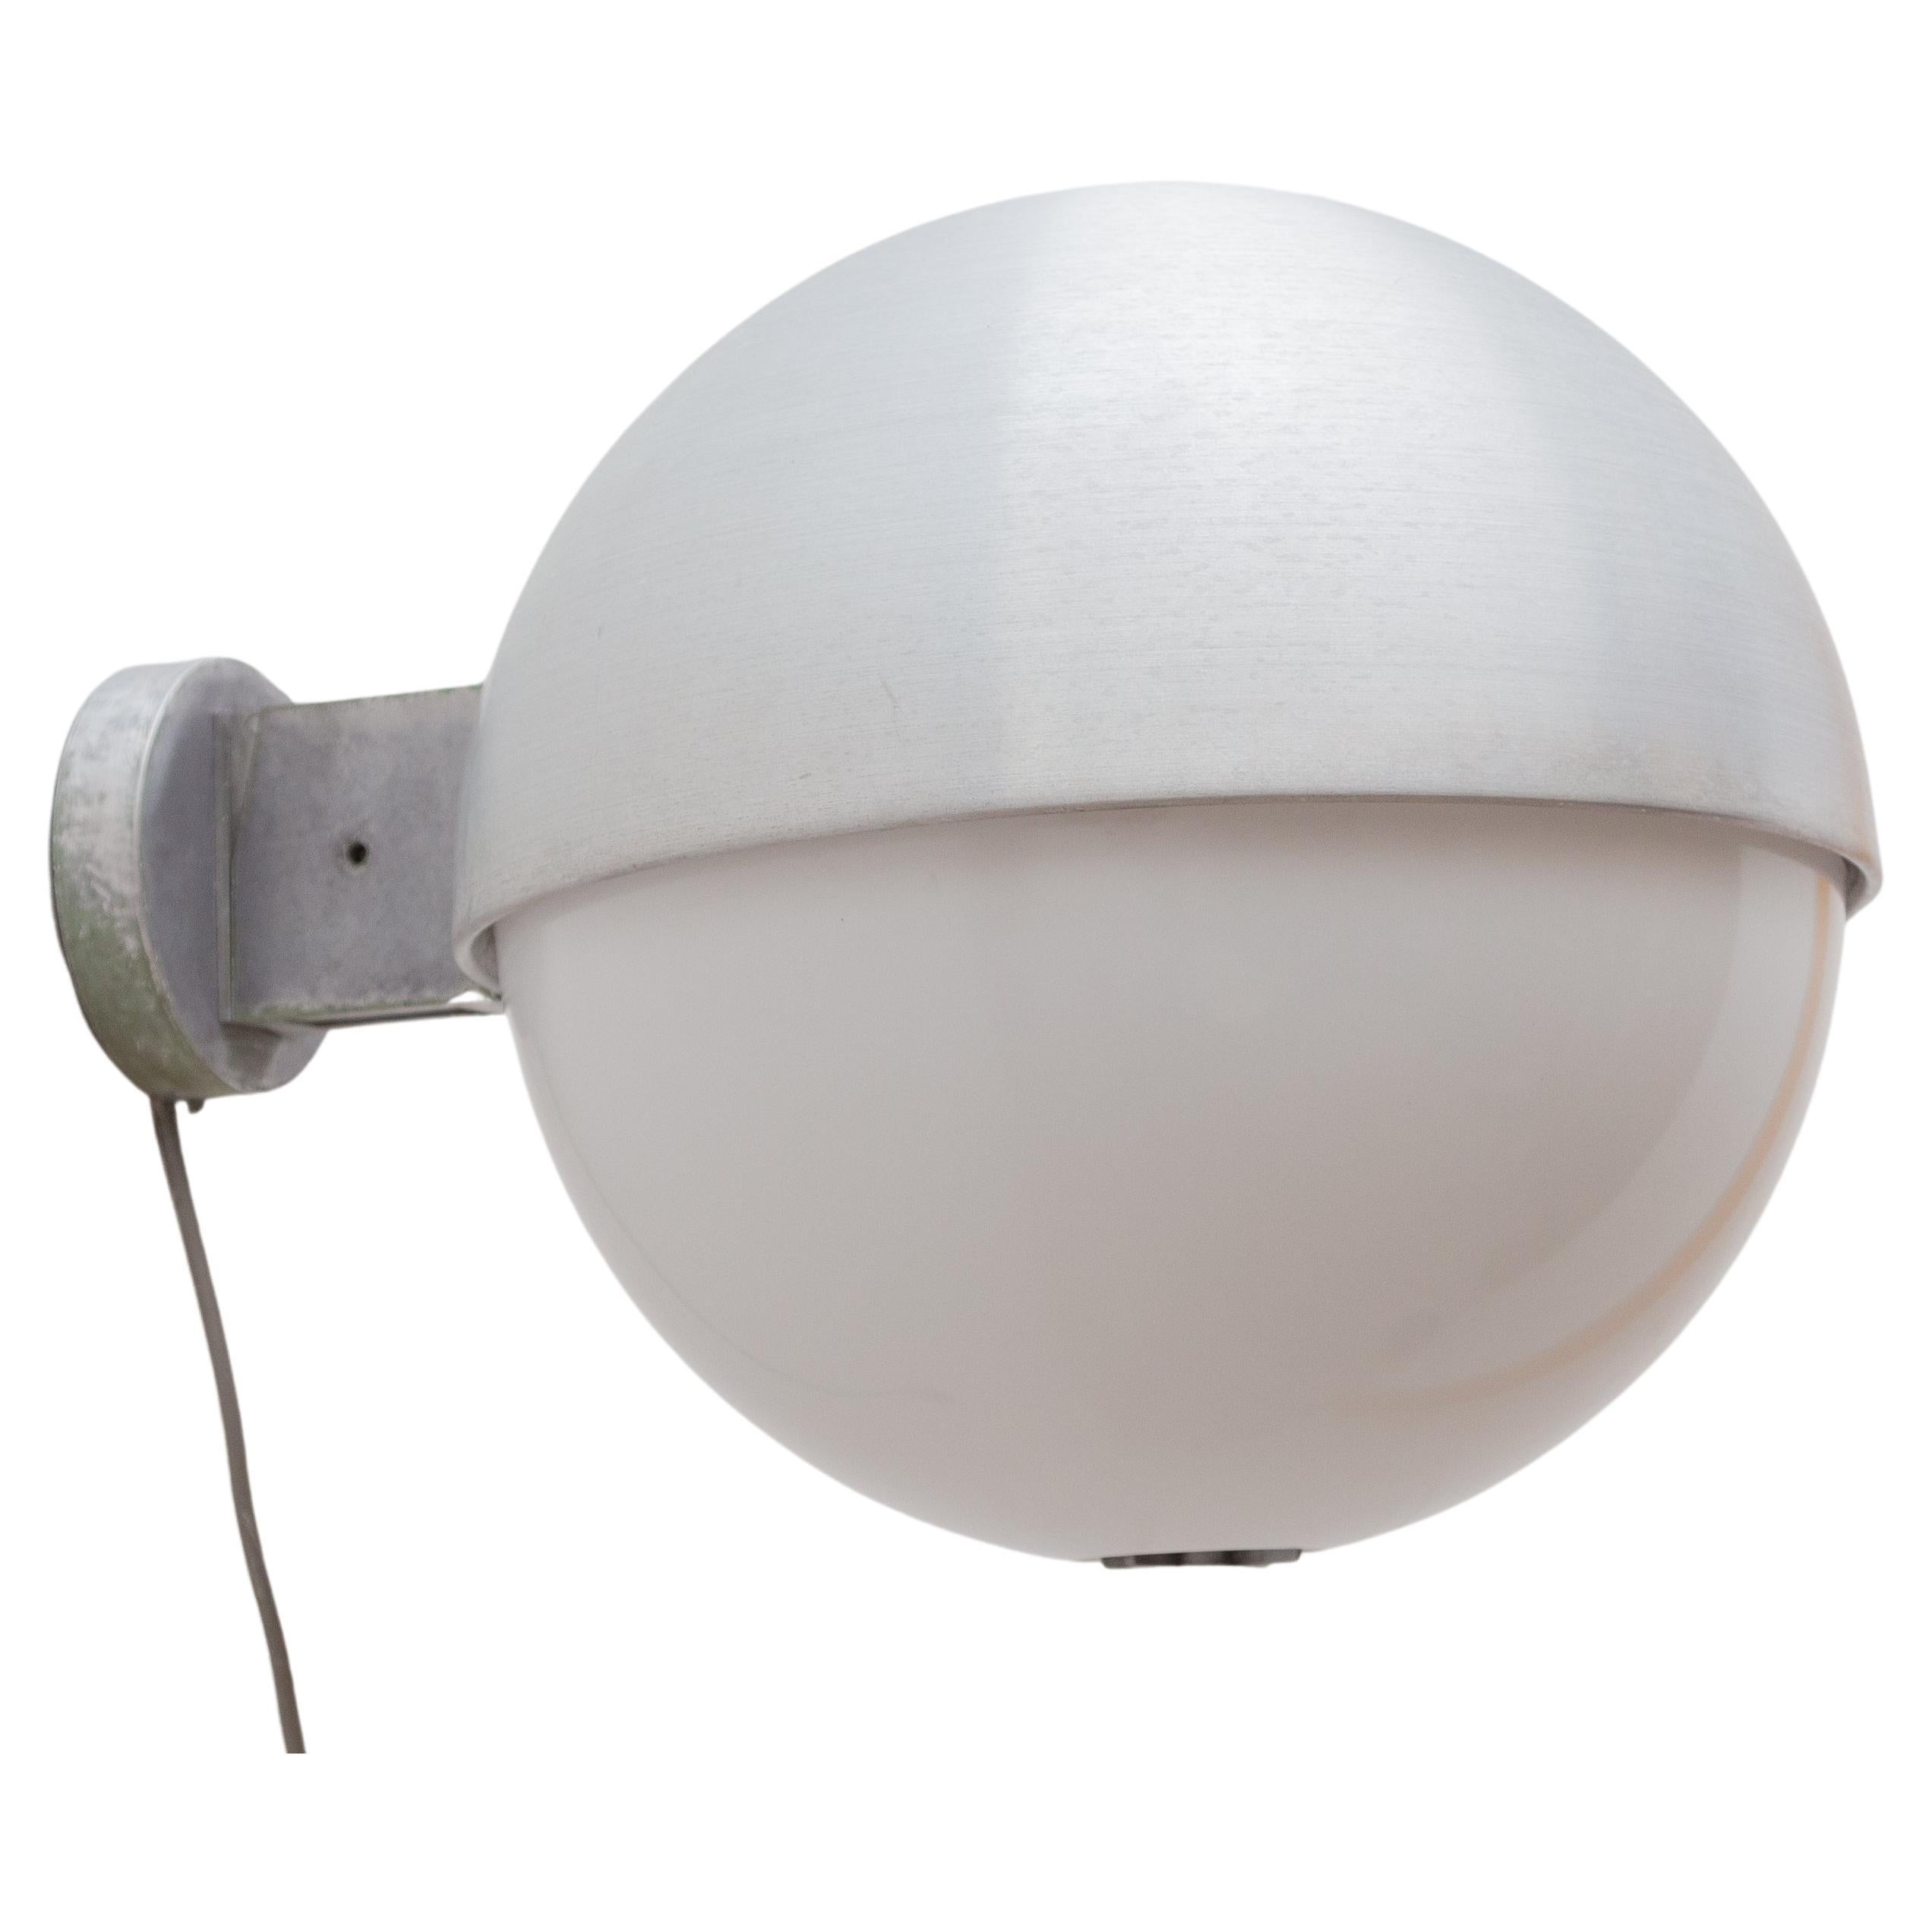 Original BEGA large globe wall lights. aluminium chrome cast fixture with white frosted plastic globe shades. Set of six pieces, price a piece, marked with stamp. Suitable for in- and outdoor use.